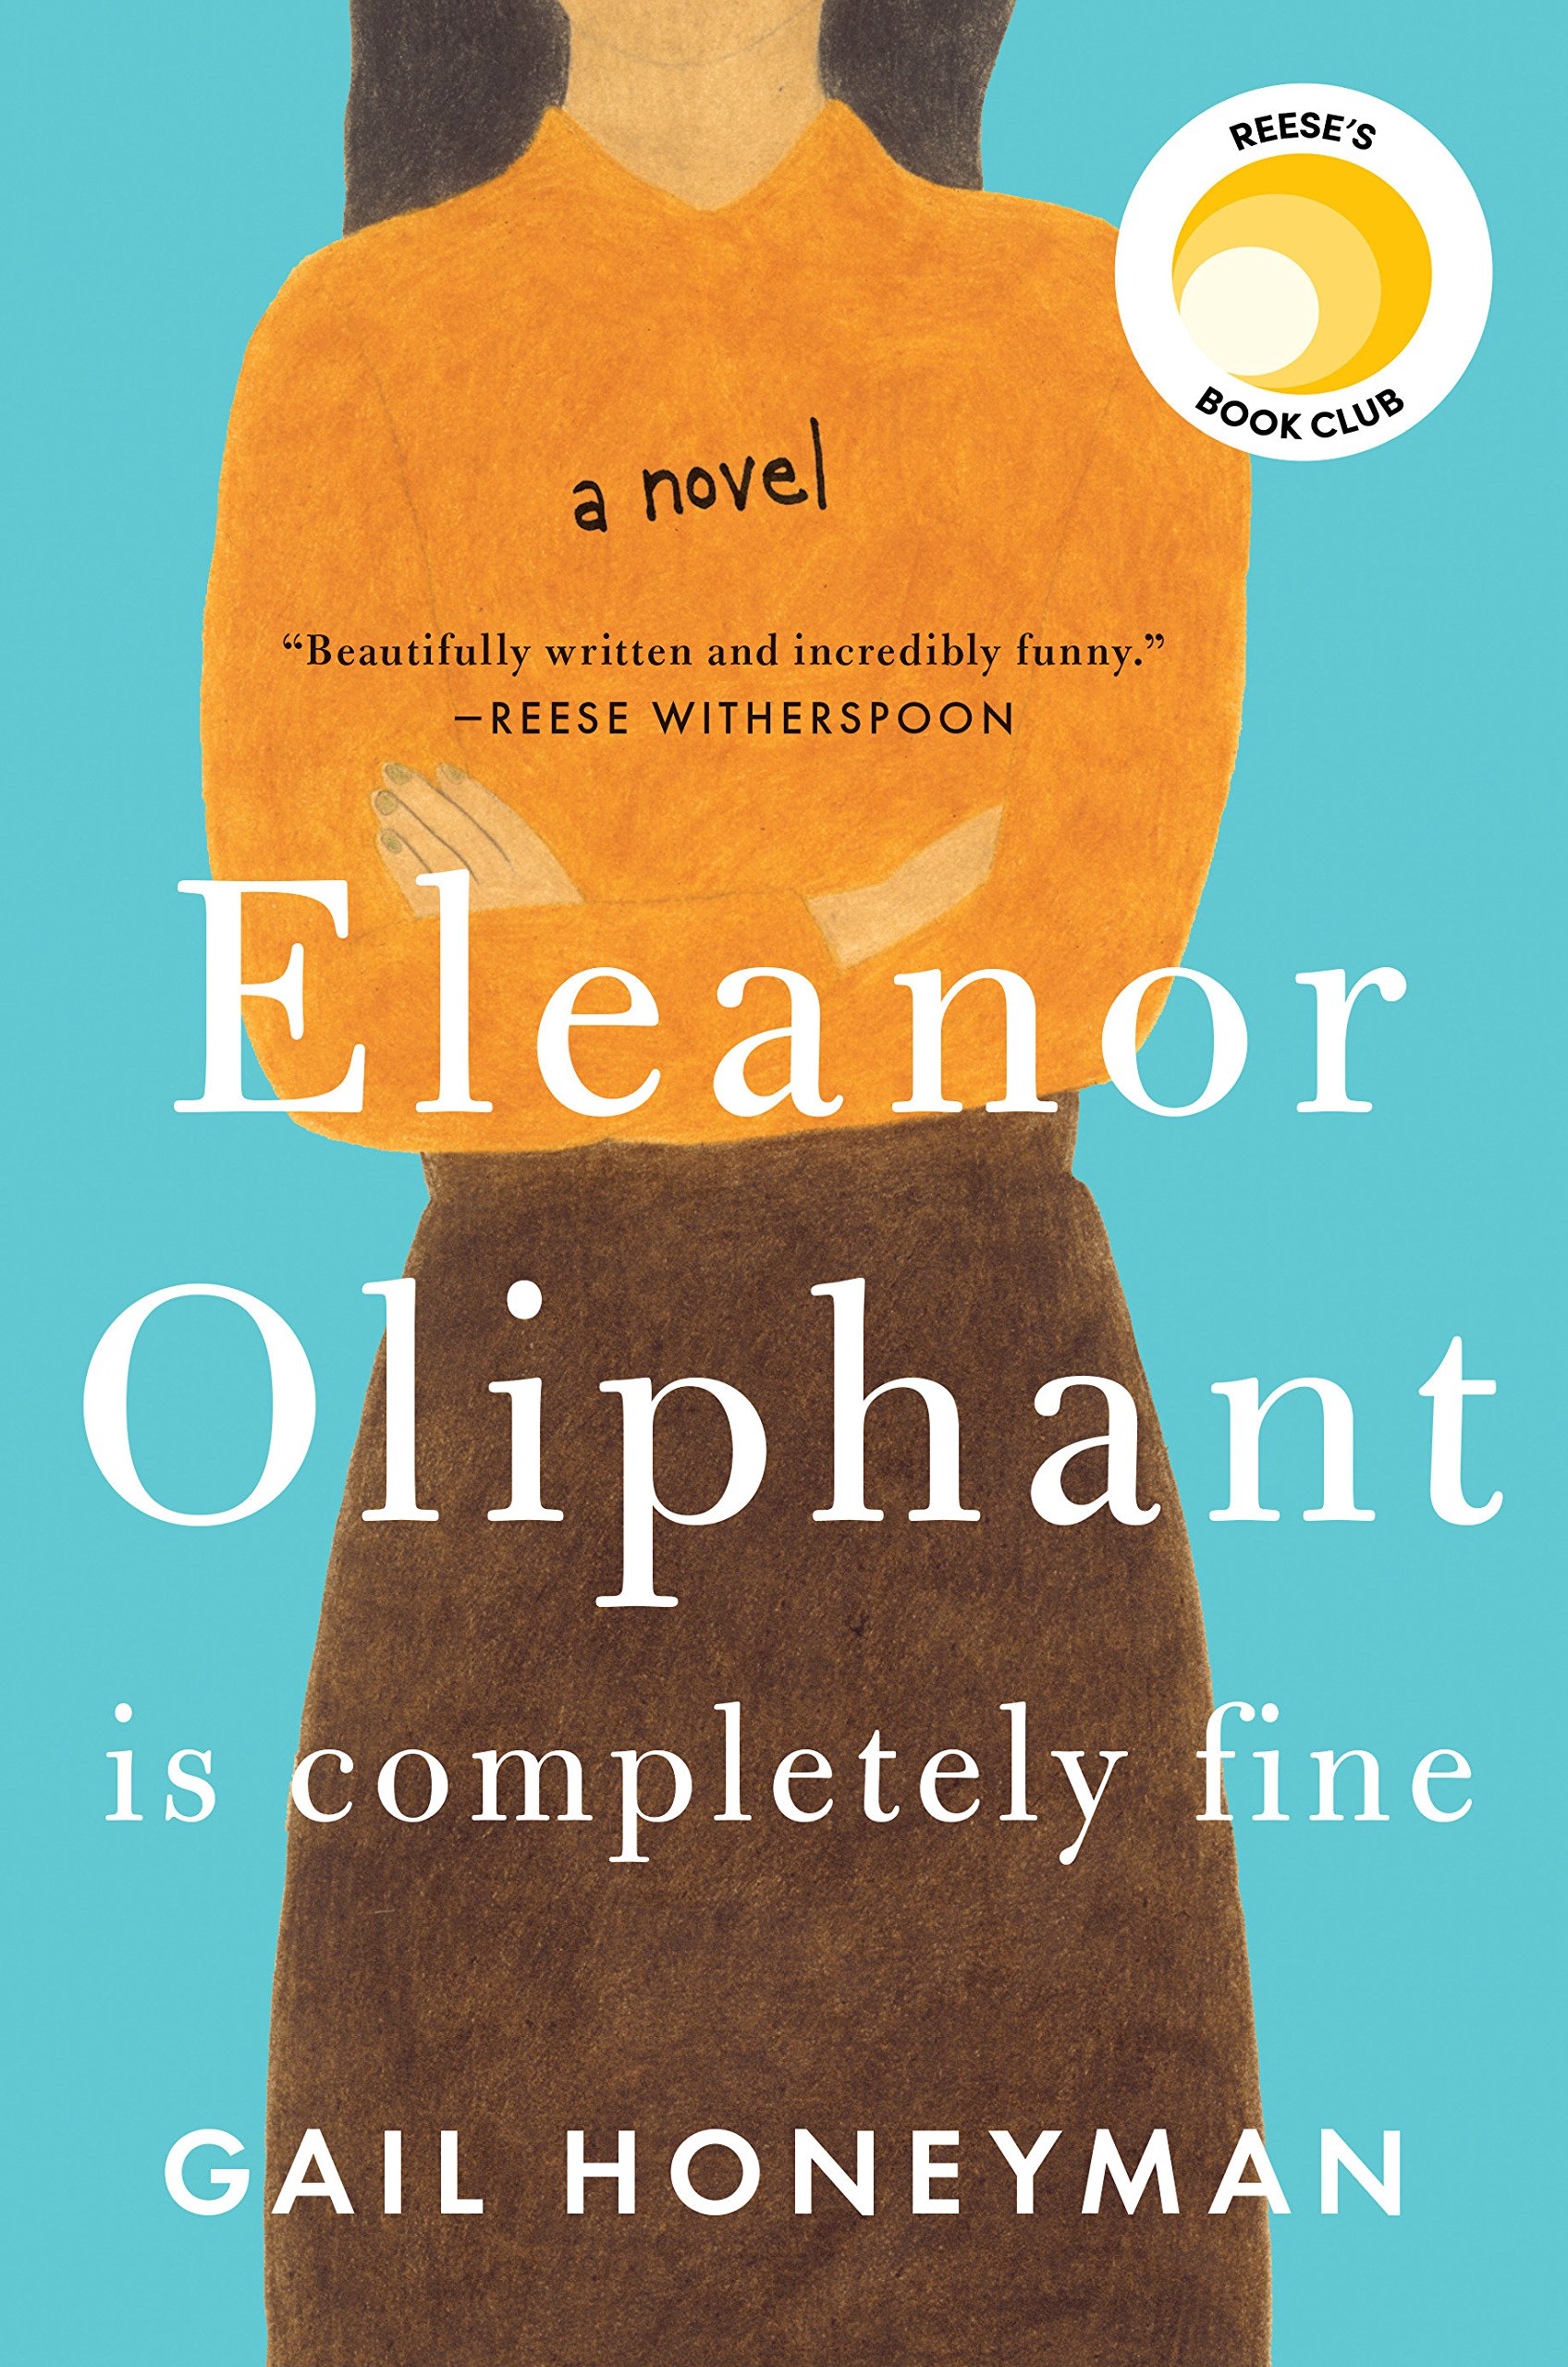 Book cover for Eleanor Oliphant is completely fine.